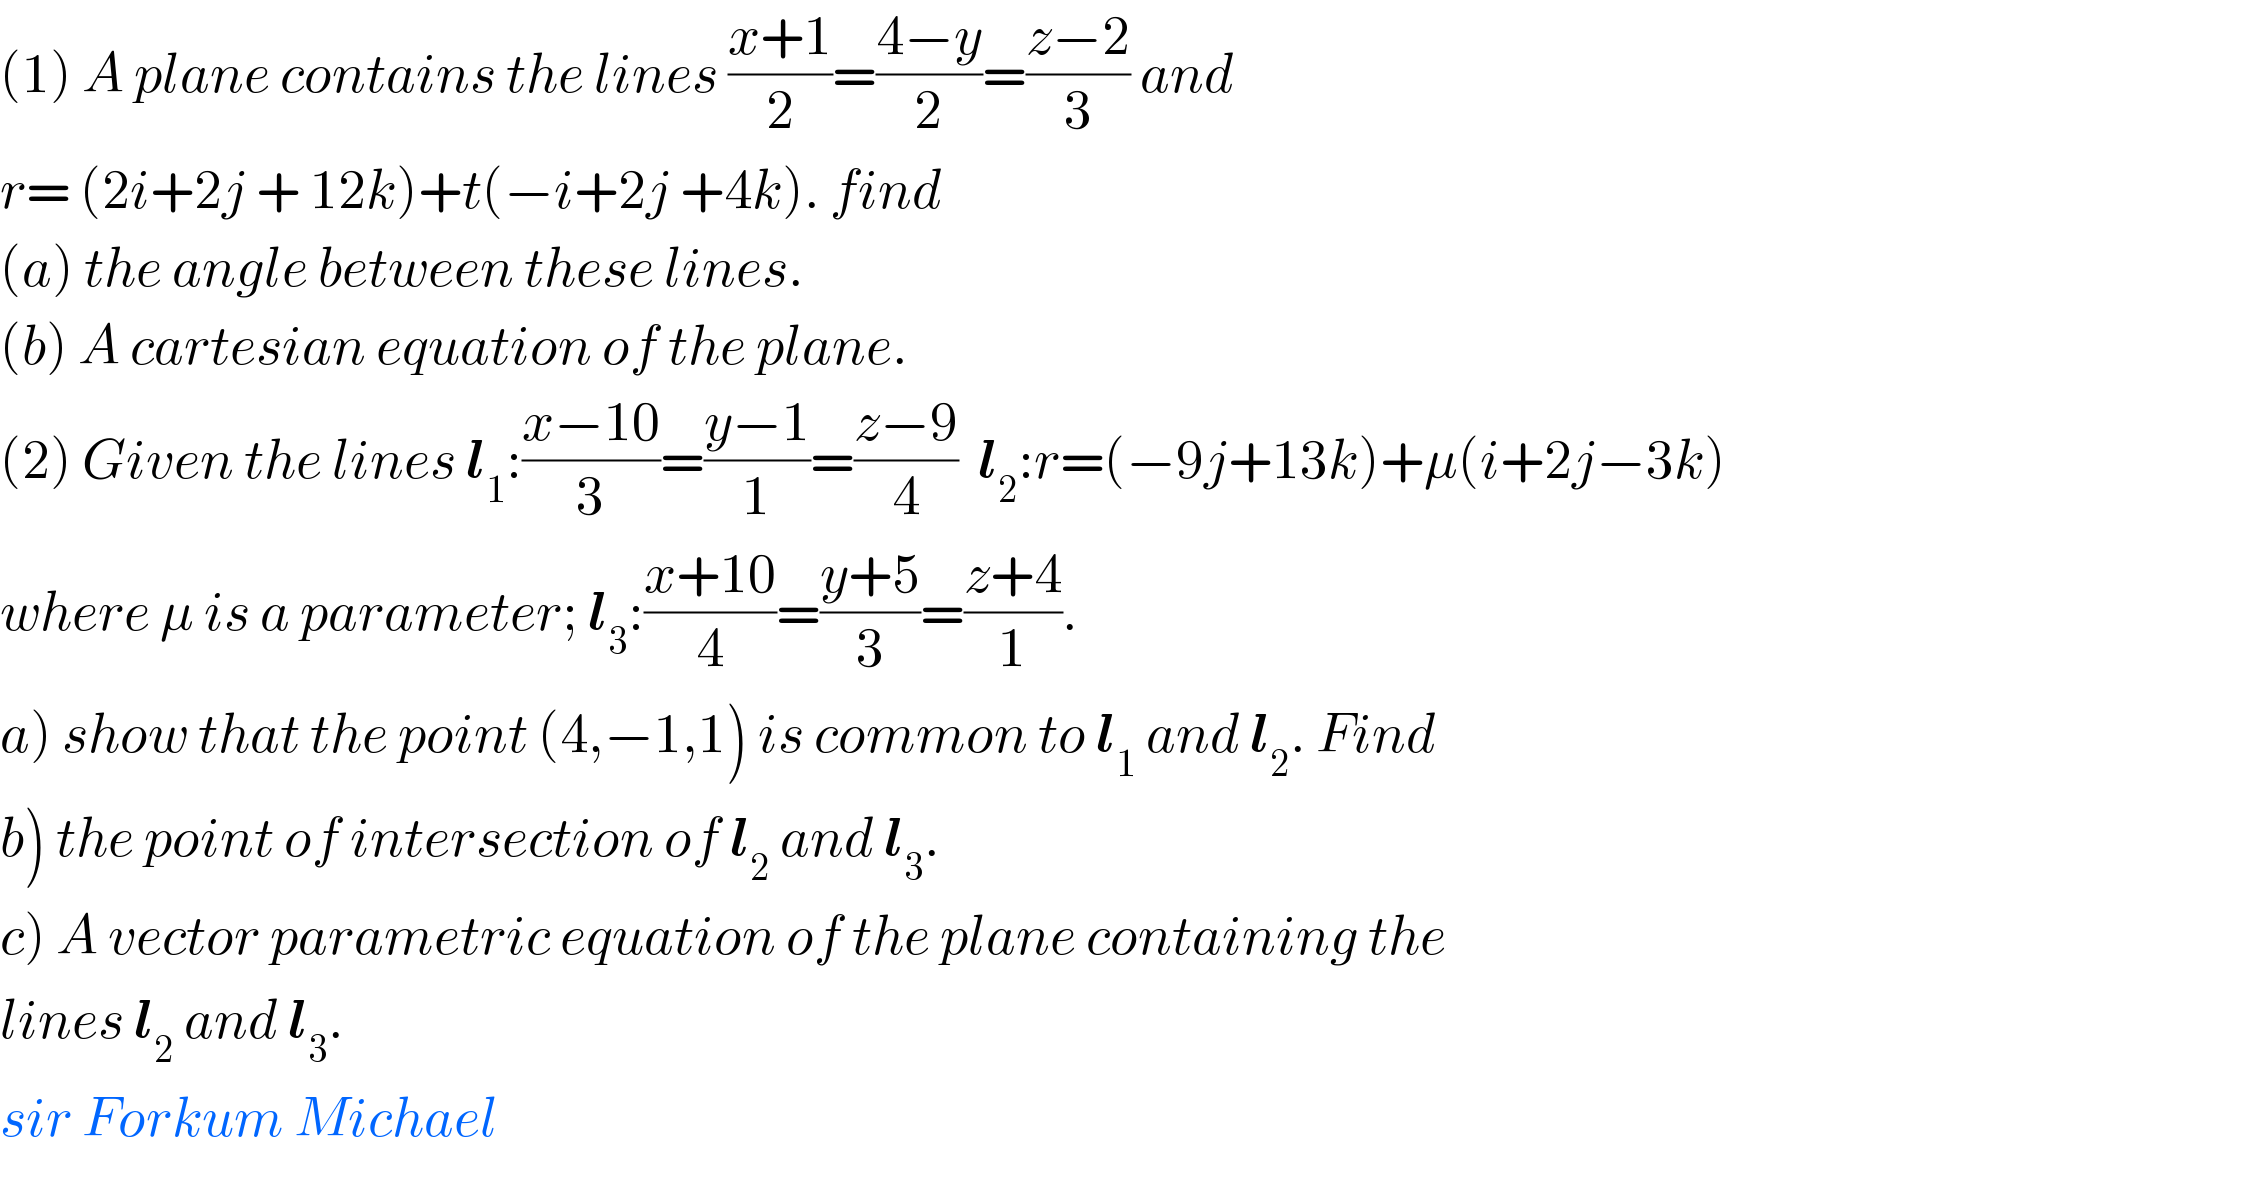 (1) A plane contains the lines ((x+1)/2)=((4−y)/2)=((z−2)/3) and   r= (2i+2j + 12k)+t(−i+2j +4k). find  (a) the angle between these lines.  (b) A cartesian equation of the plane.  (2) Given the lines l_1 :((x−10)/3)=((y−1)/1)=((z−9)/4)  l_2 :r=(−9j+13k)+μ(i+2j−3k)  where μ is a parameter; l_3 :((x+10)/4)=((y+5)/3)=((z+4)/1).  a) show that the point (4,−1,1) is common to l_1  and l_2 . Find  b) the point of intersection of l_2  and l_3 .  c) A vector parametric equation of the plane containing the  lines l_2  and l_3 .  sir Forkum Michael  